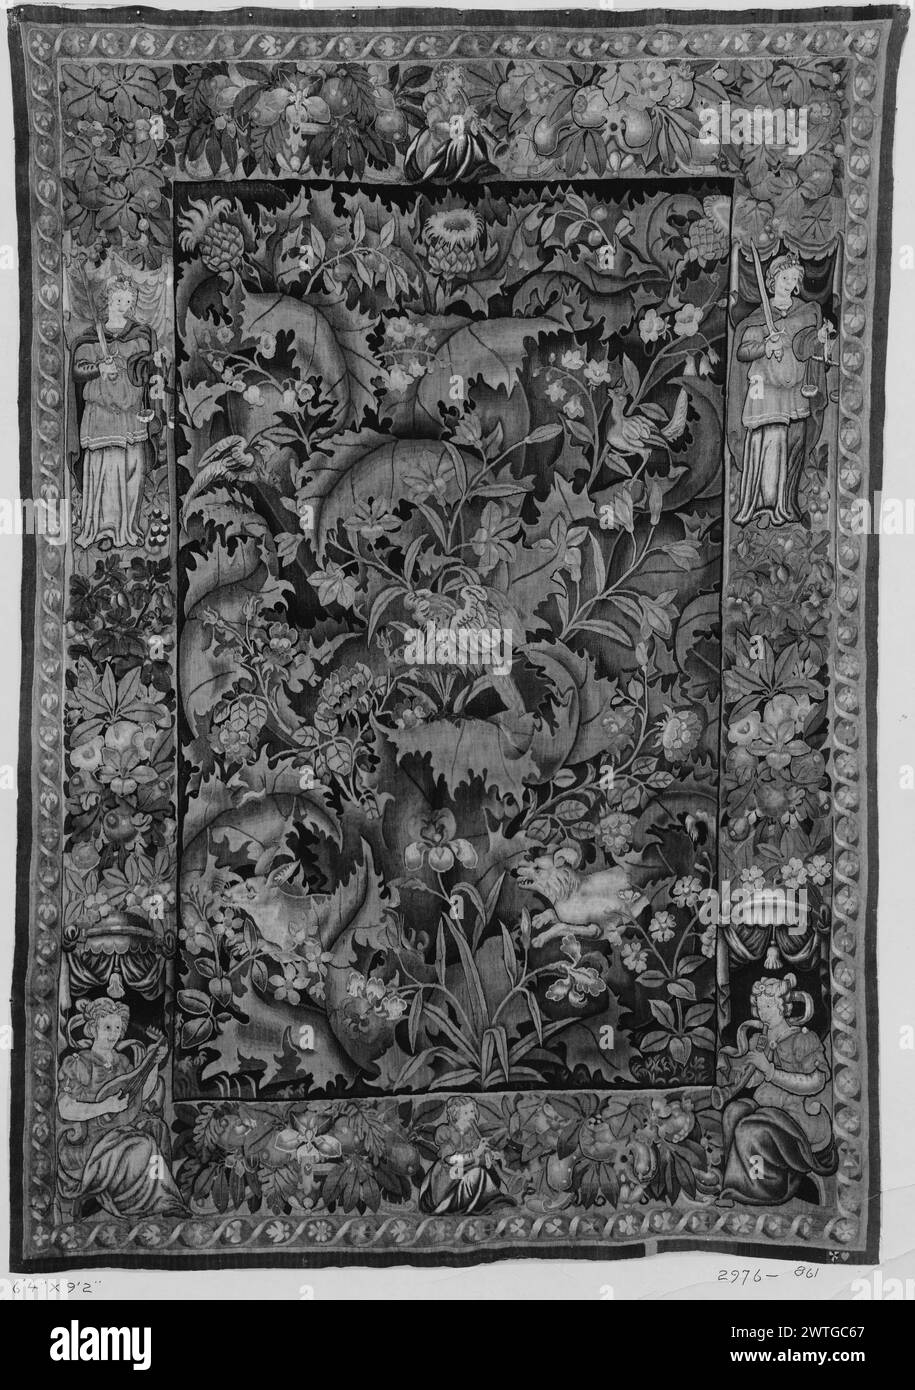 Large-leaf verdure (feuille de choux) with parrot, lion and deer. unknown c. 1550 Tapestry Dimensions: H 9'2' x W 6'4' Tapestry Materials/Techniques: unknown Culture: Flemish Weaving Center: Enghien Ownership History: French & Co. purchased from Antique Rug Studios 7/26/1915 [SS 2976]. French & Co. purchased from Mrs. Georgia Bostder, 8/28/1941 [SS 75481]. Inscriptions: City mark on lower guard, right Inscriptions: unidentified weaver mark on lower guard, right Central parrot, other birds, & lion chasing deer below; amidst giant, scrolling acanthus-like leaves with serrated edges, & flowering Stock Photo